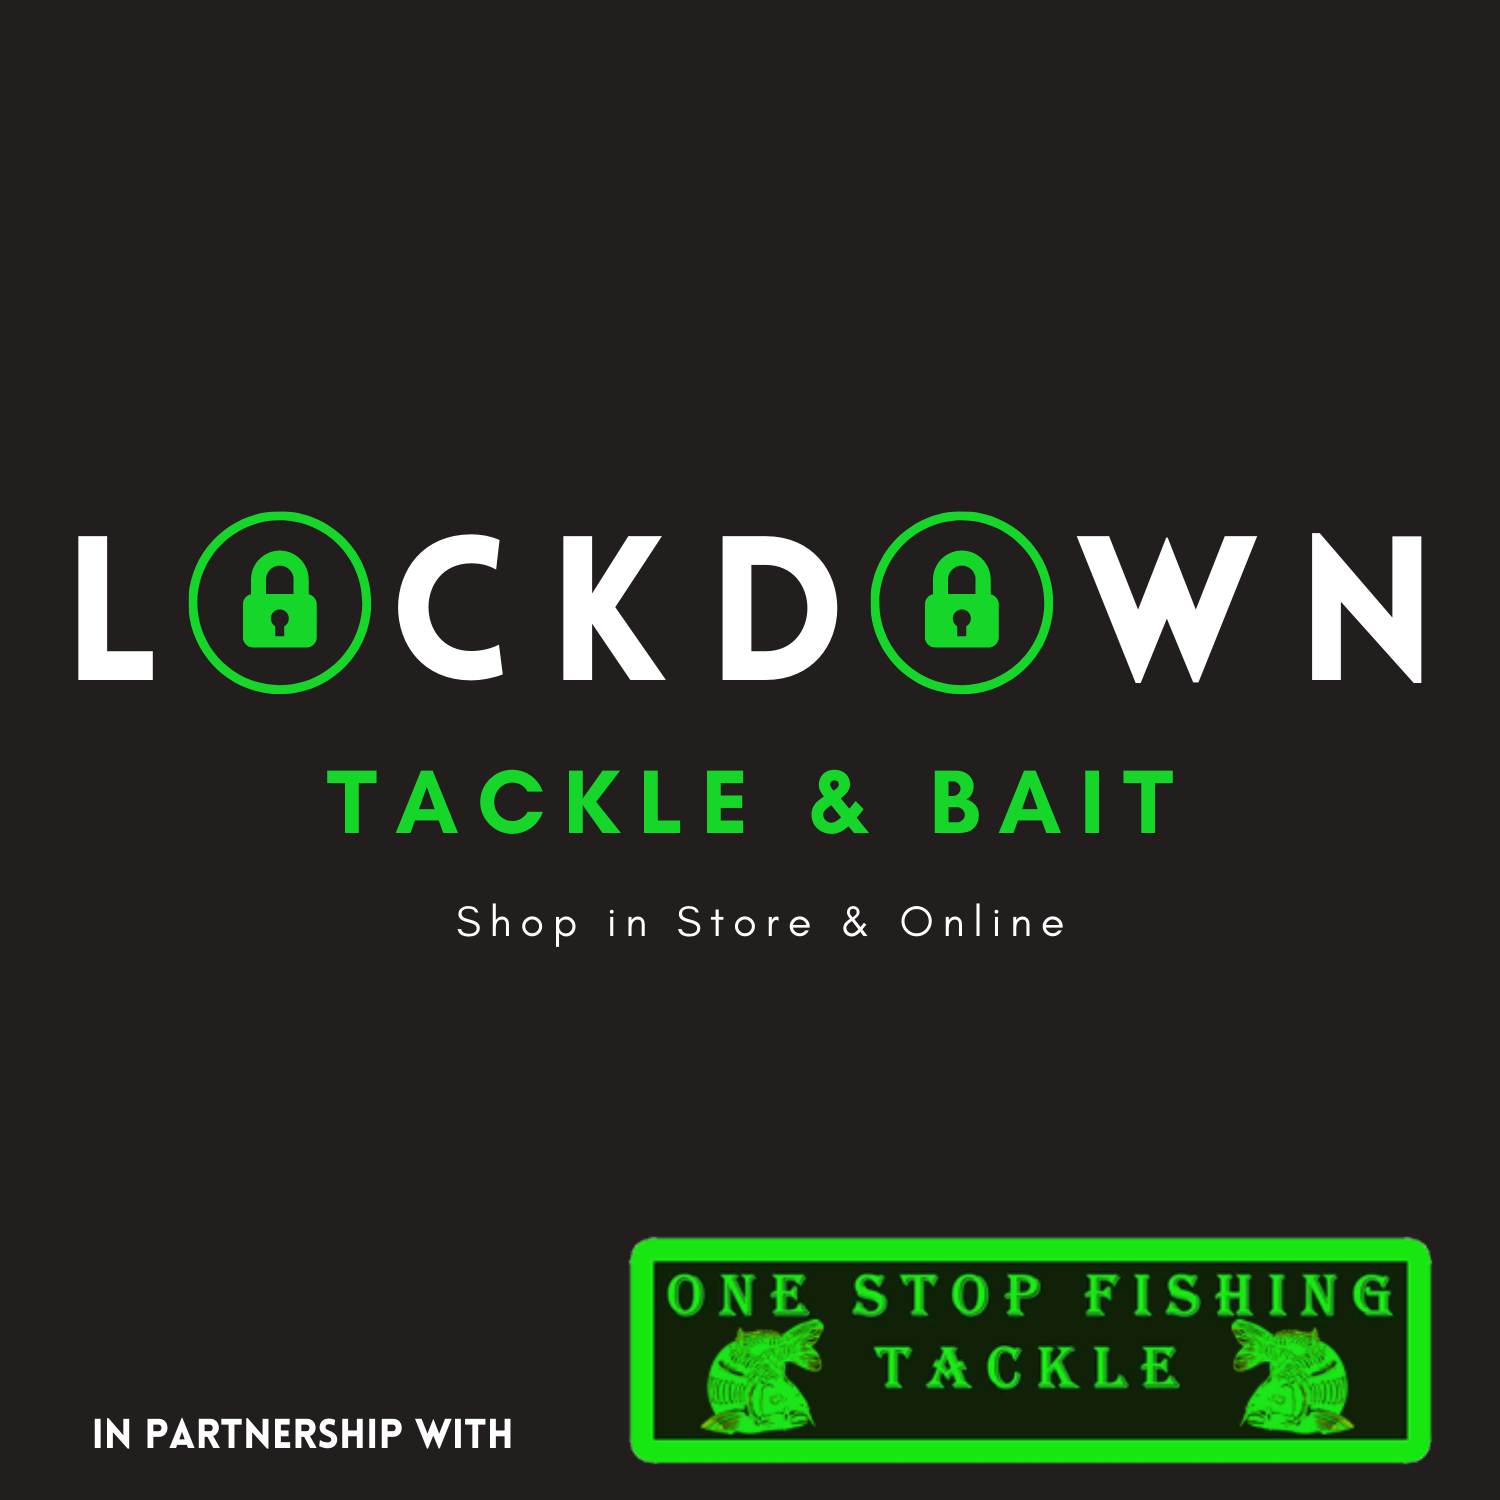 LockDown Tackle and Bait